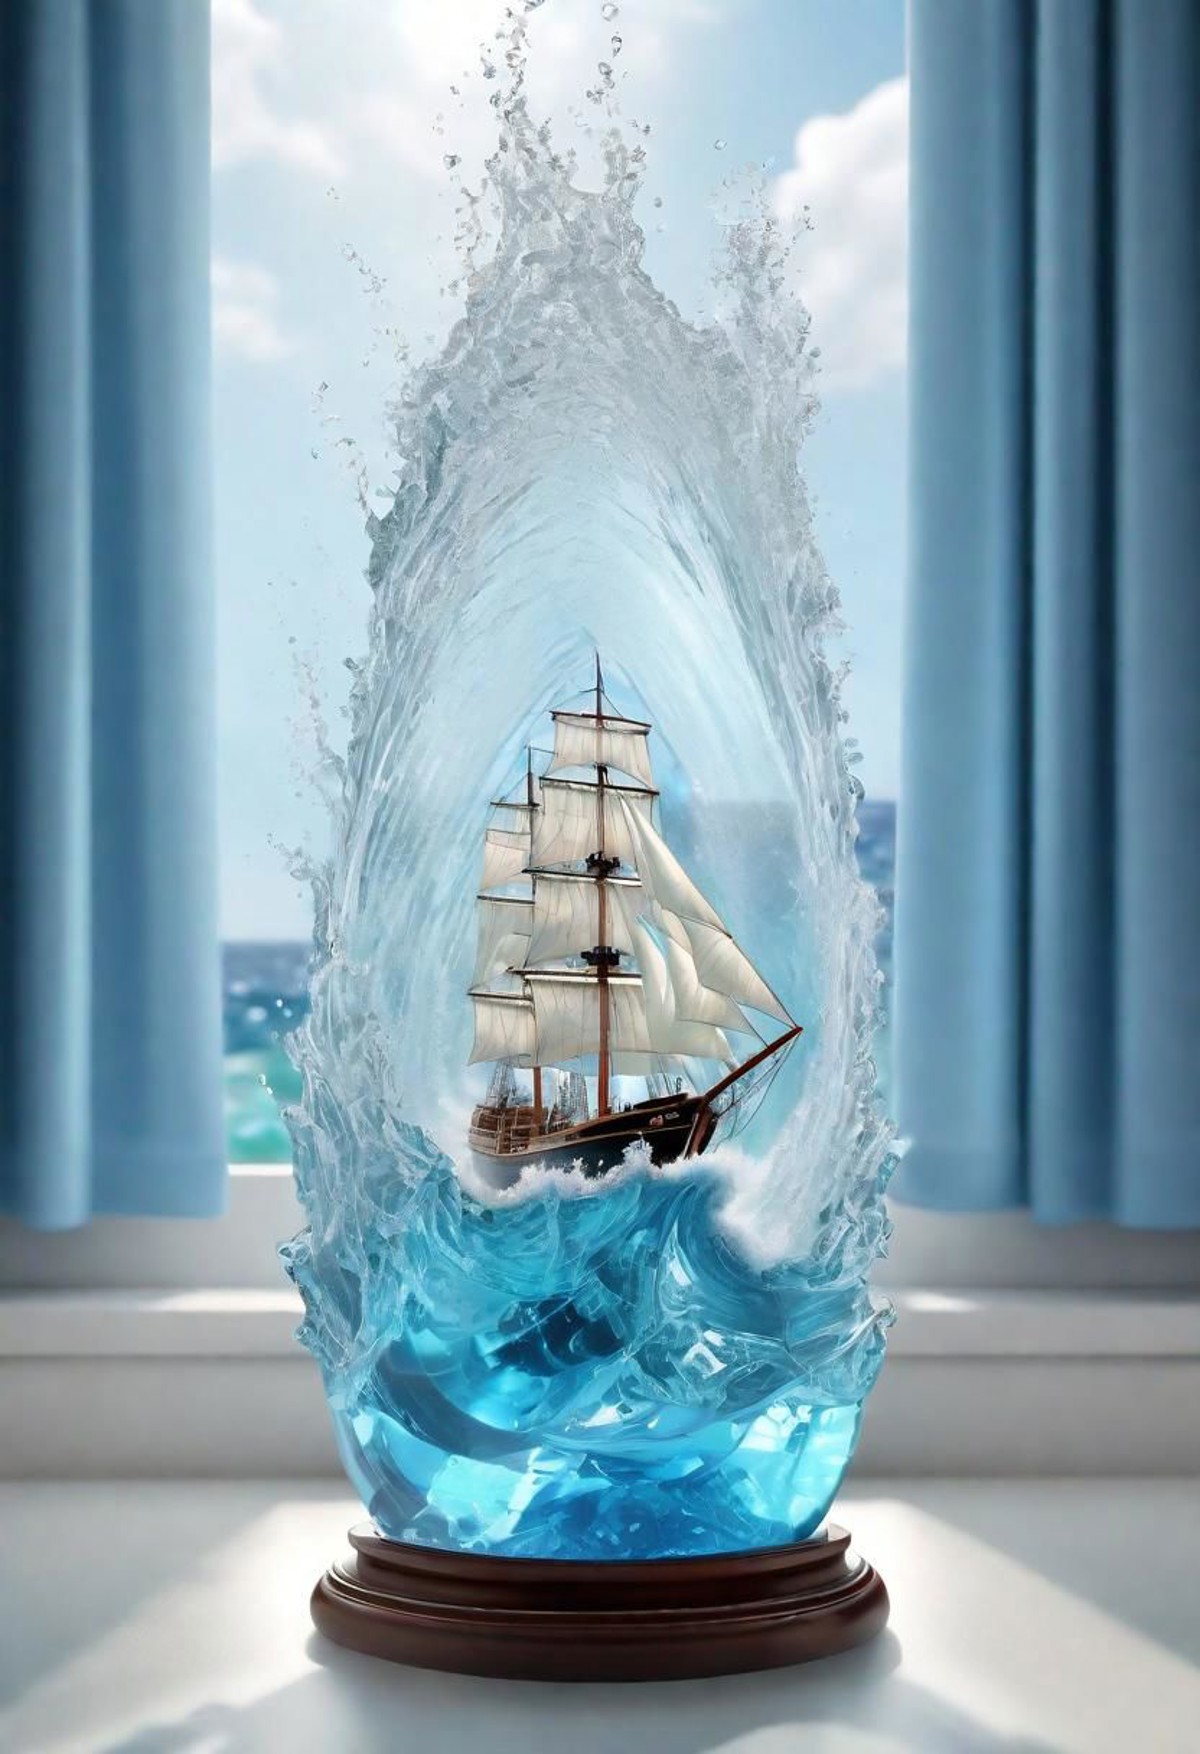 small ship in an open bottle, strong ocean waves, storm, water spray, wind, extreme detail, 3d view, breaking glass, backl...